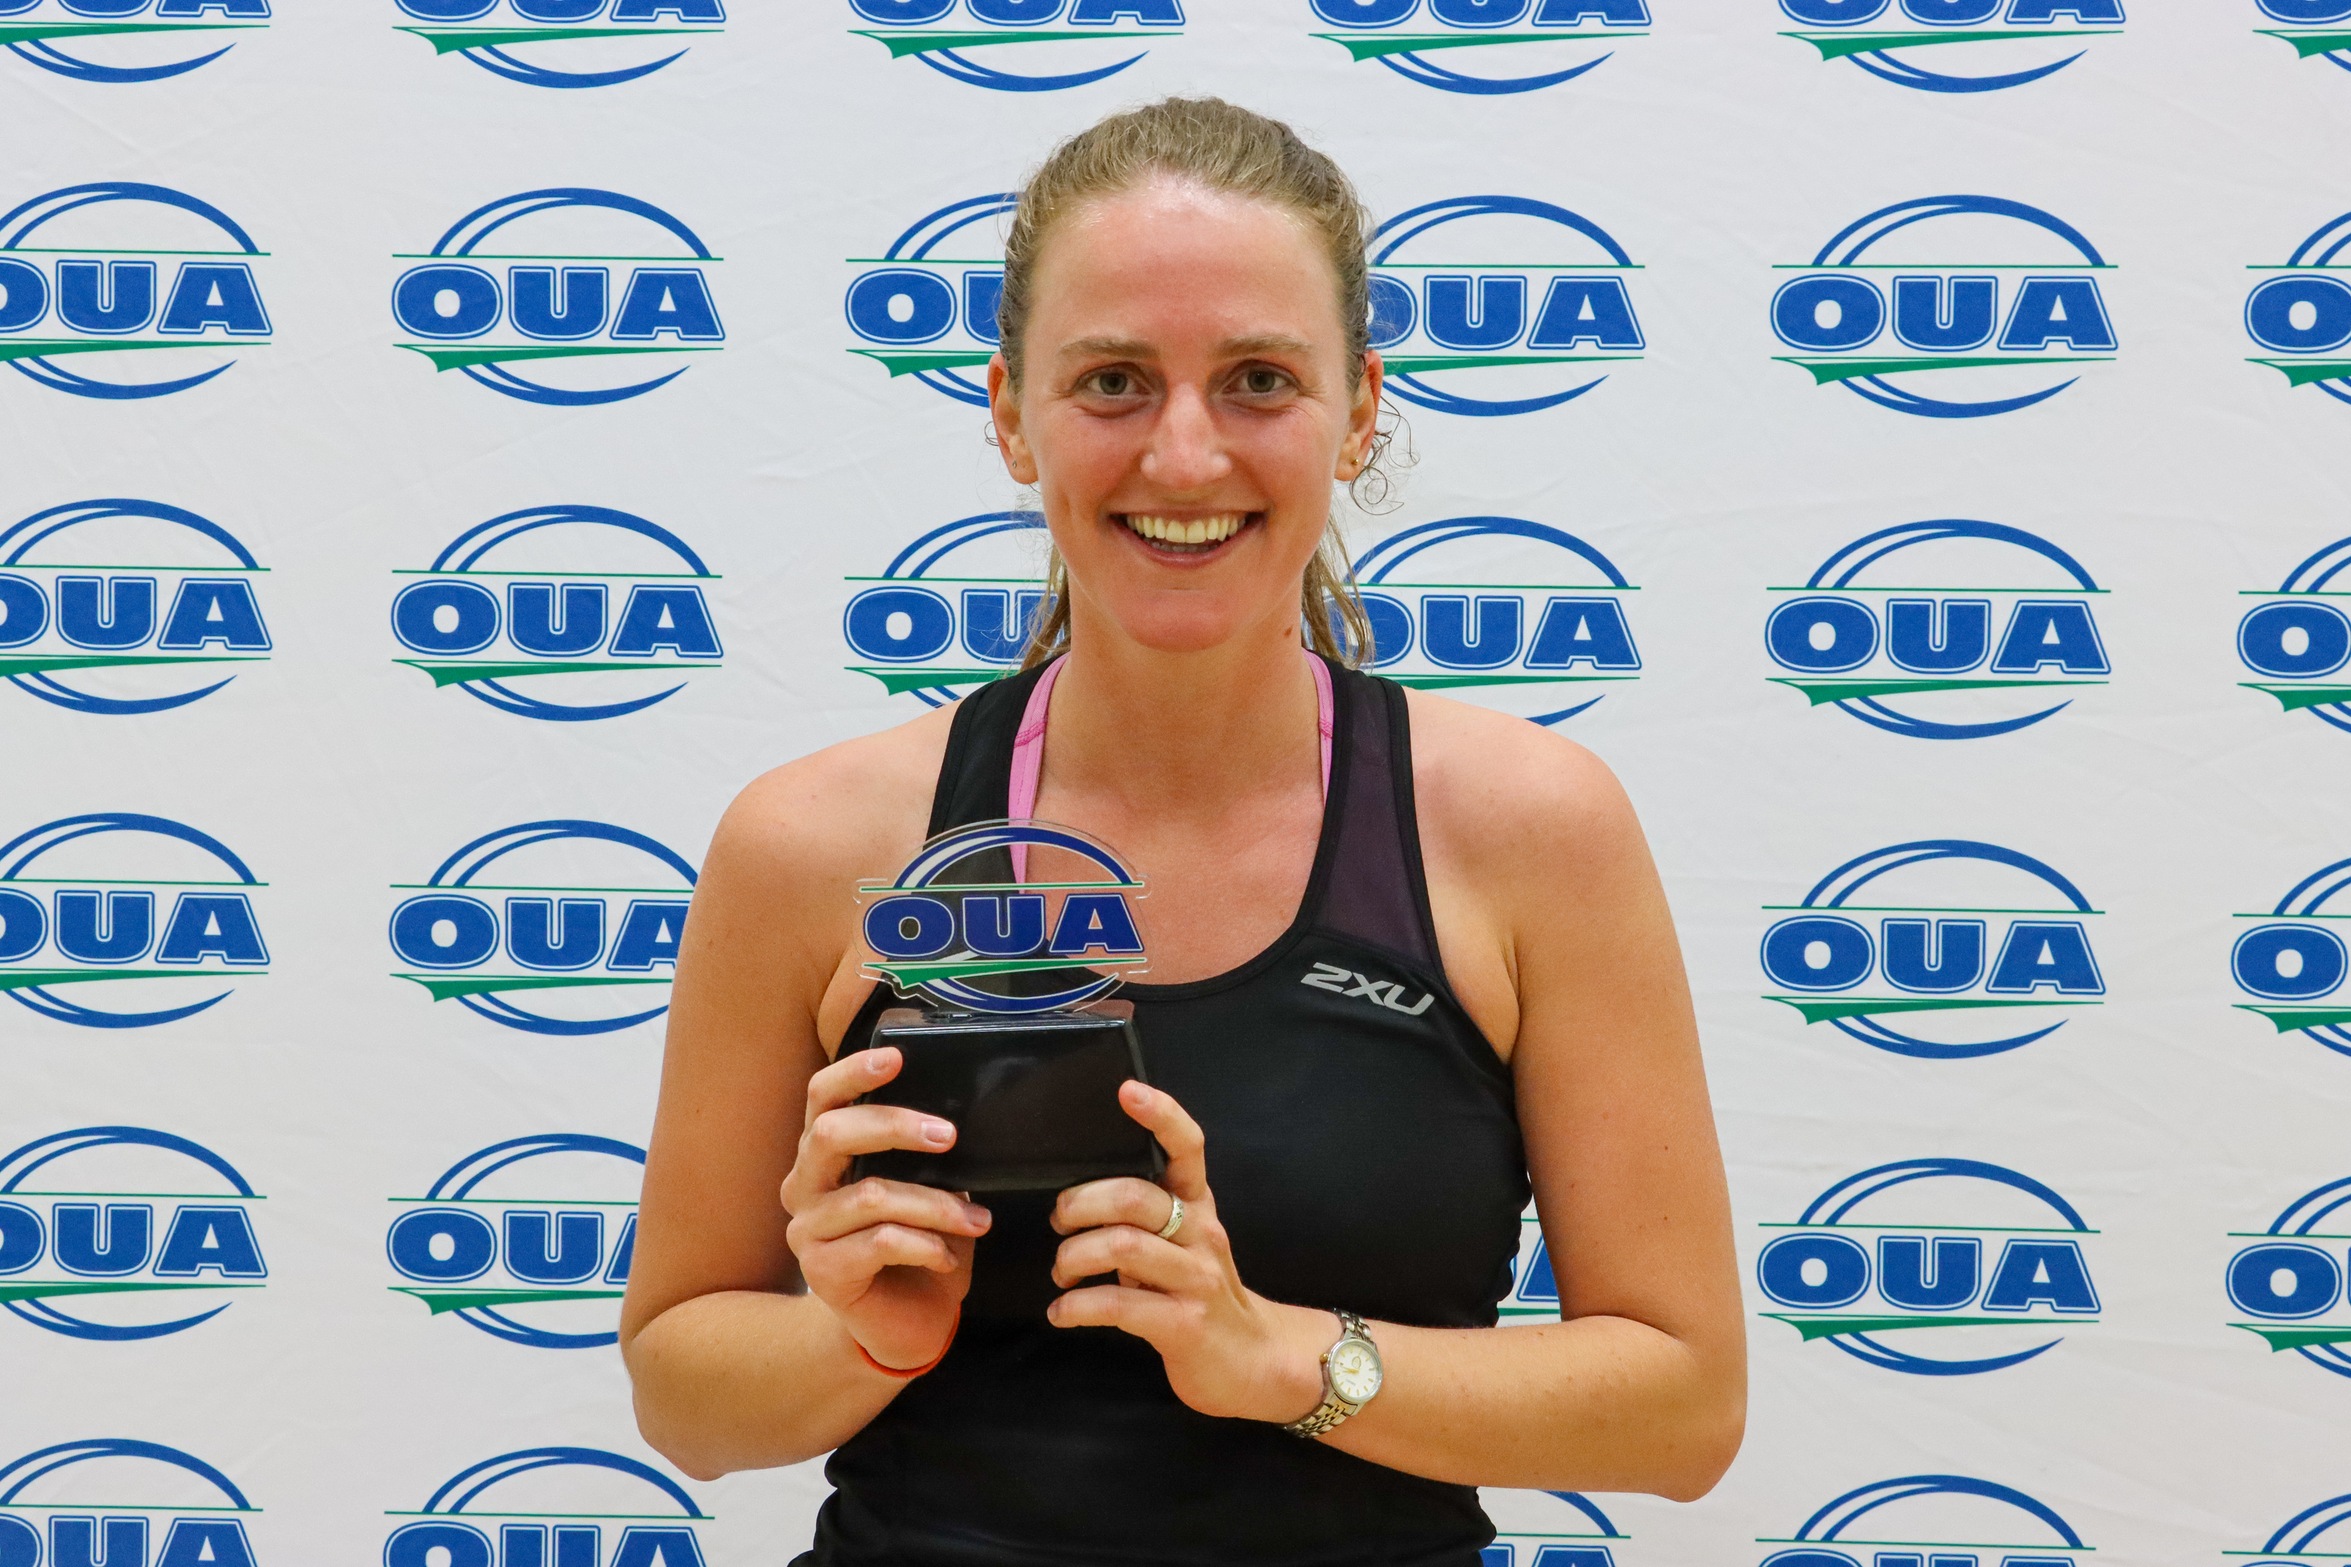 Queen's women's squash player Maddie O'Connor posing in front of an OUA step-and-repeat backdrop holding an OUA trophy